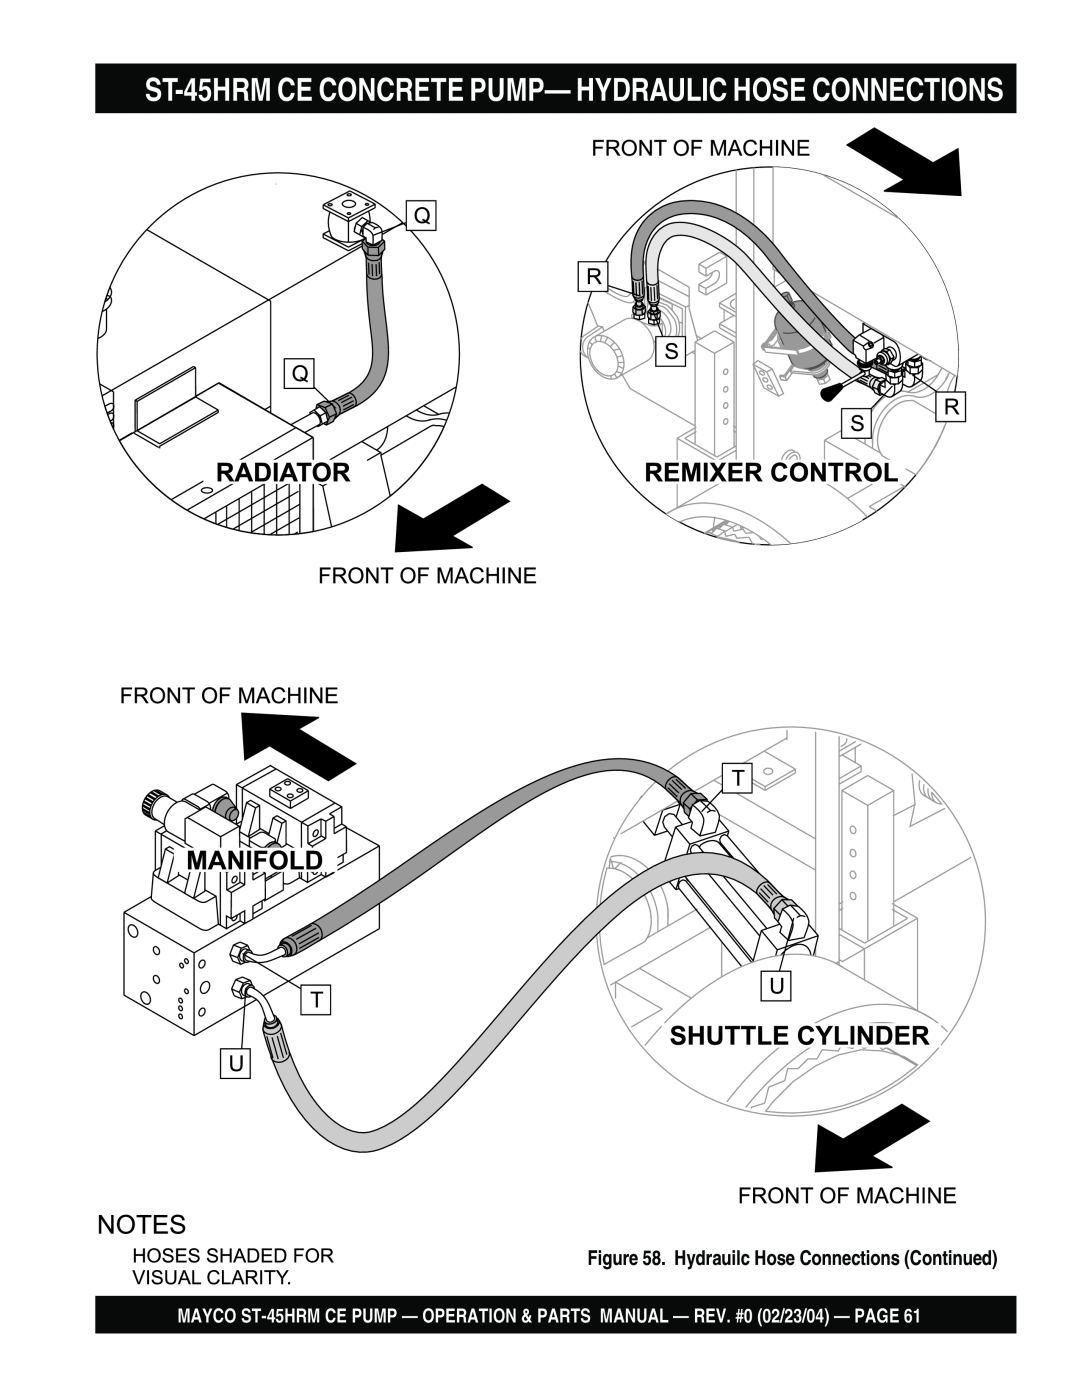 Multiquip ST-45HRM CE manual Hydrauilc Hose Connections Continued 